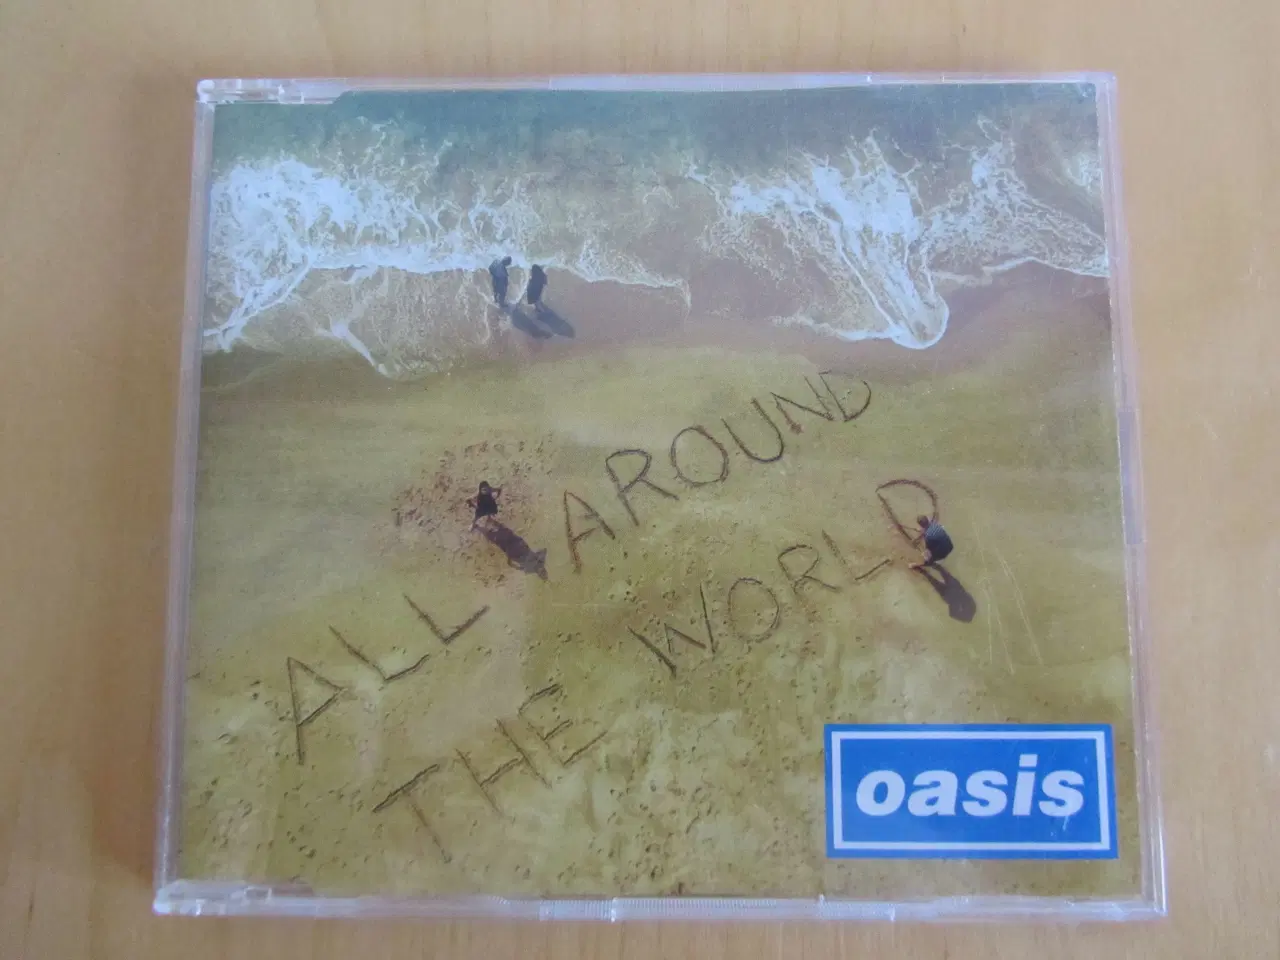 Billede 1 - Oasis - All Around the World single CD